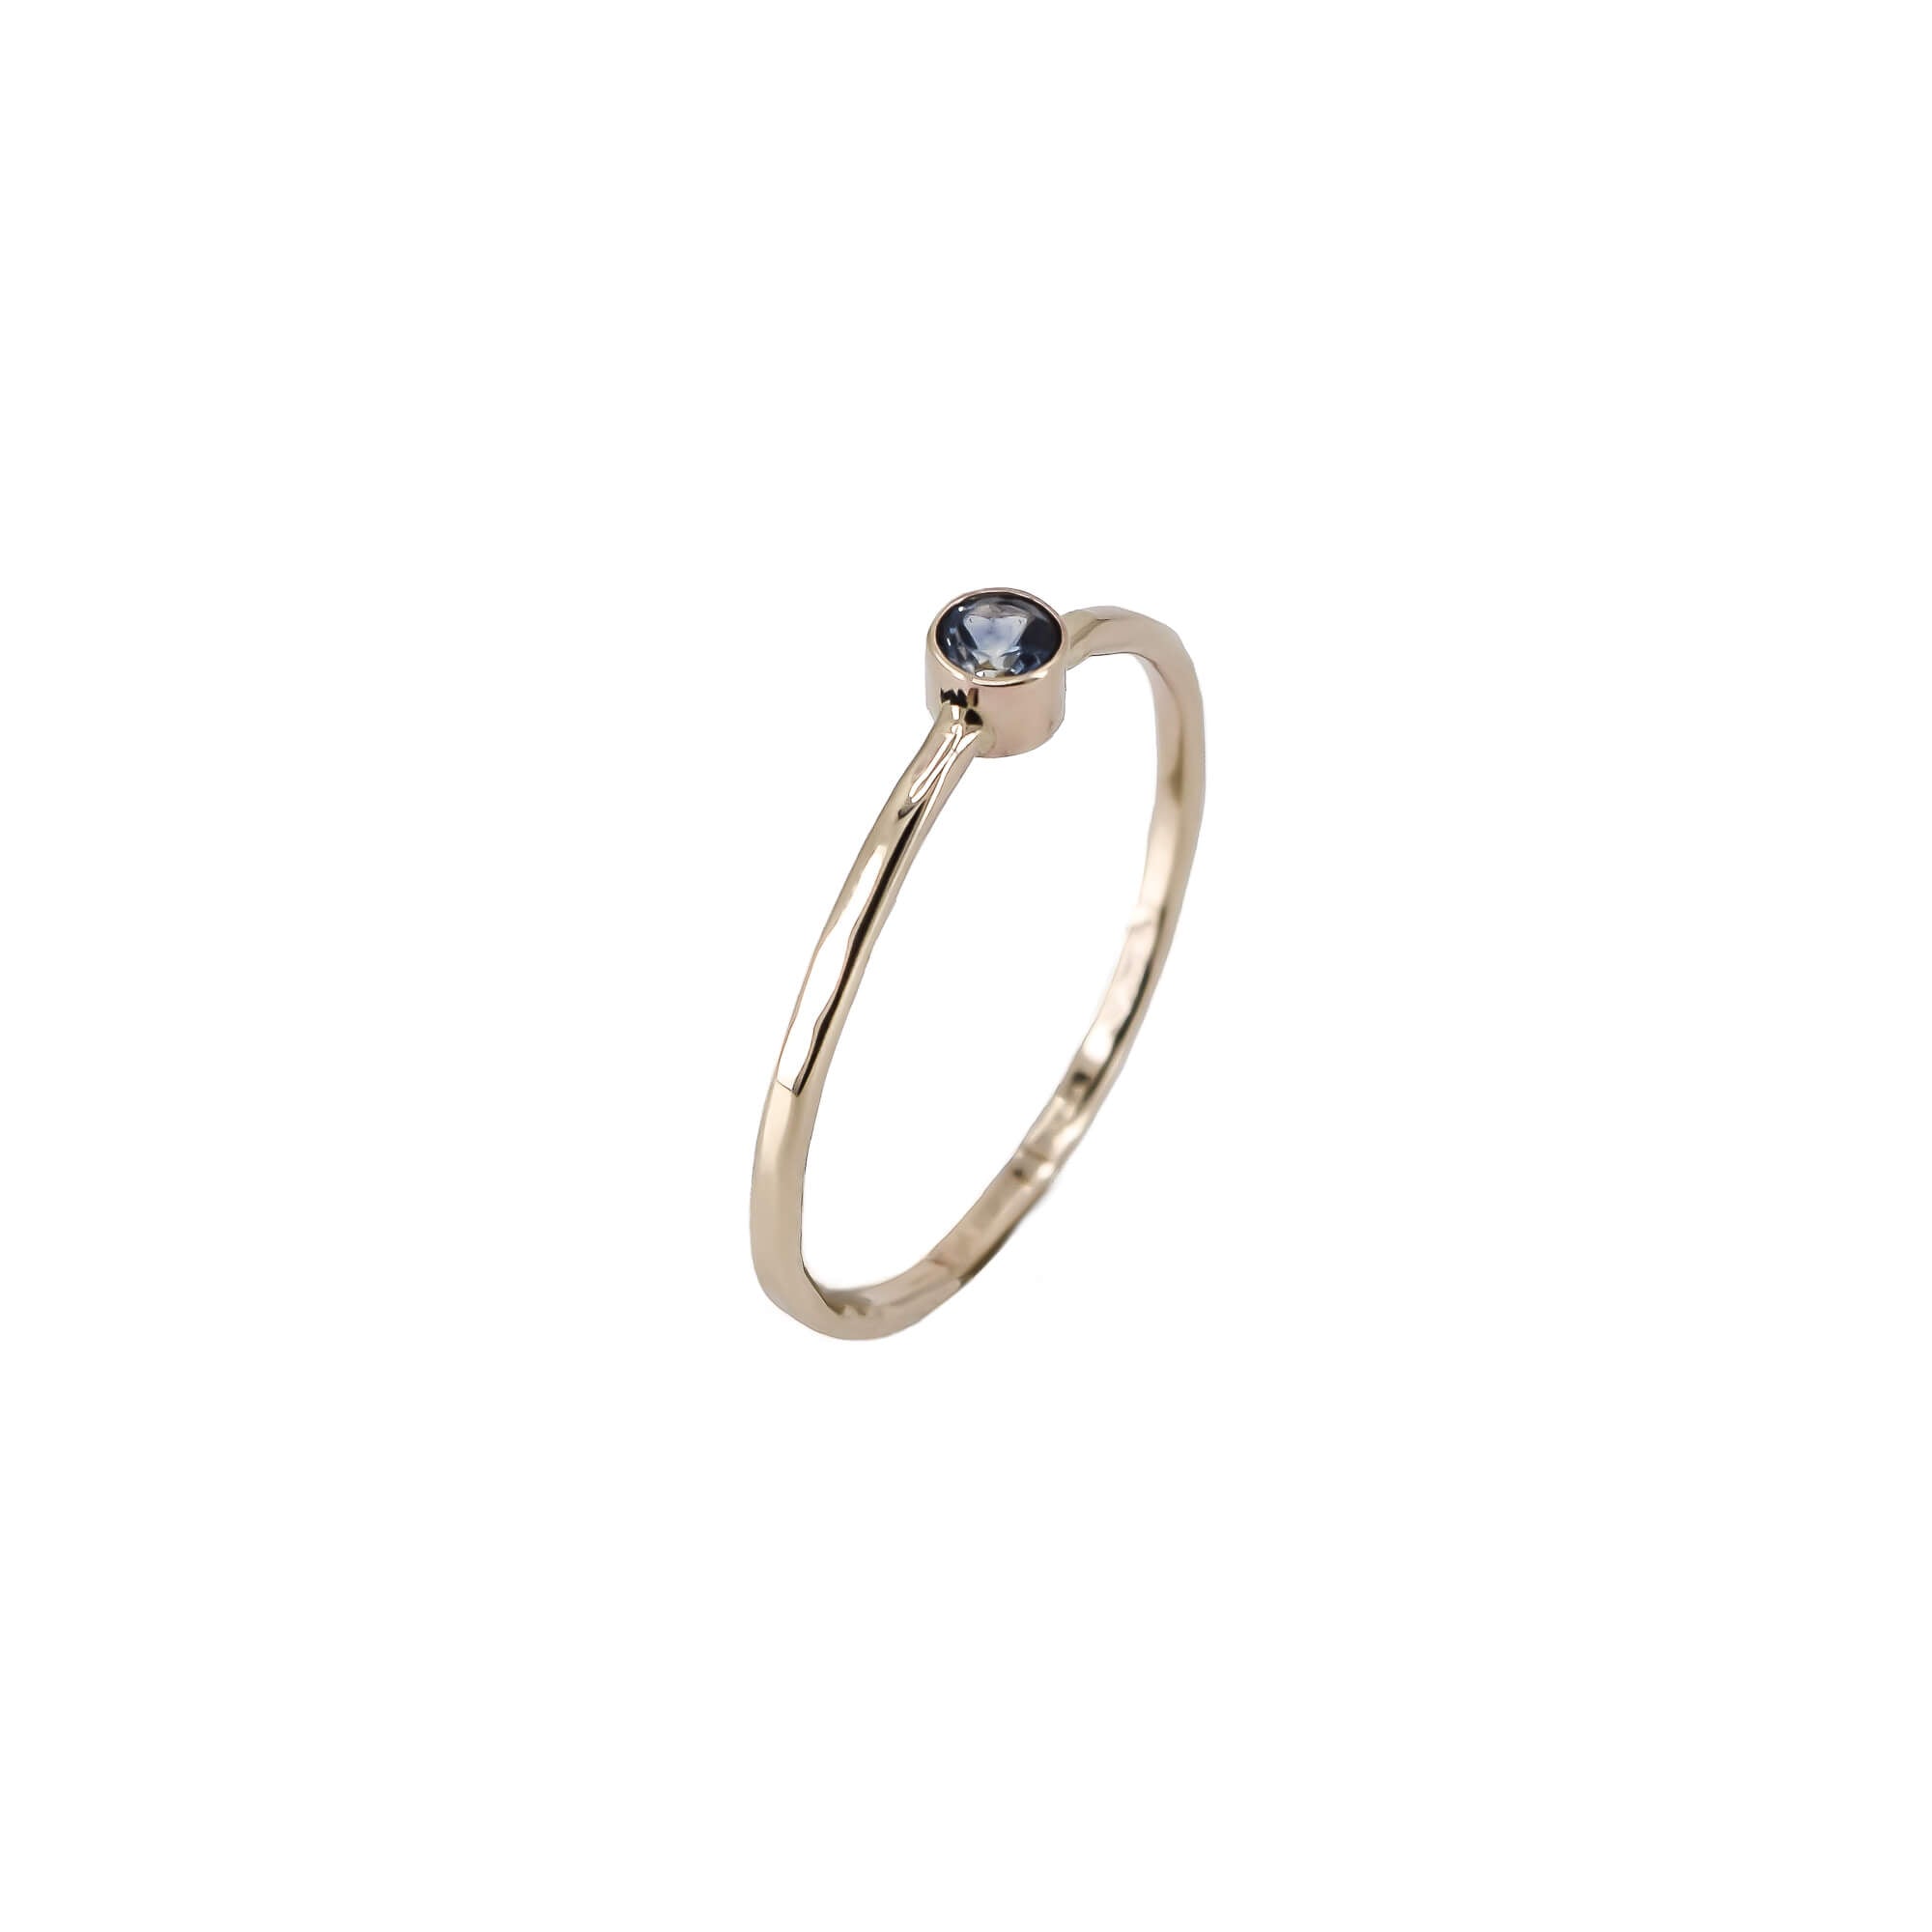 thin 14K yellow gold stacking ring with teal sapphire